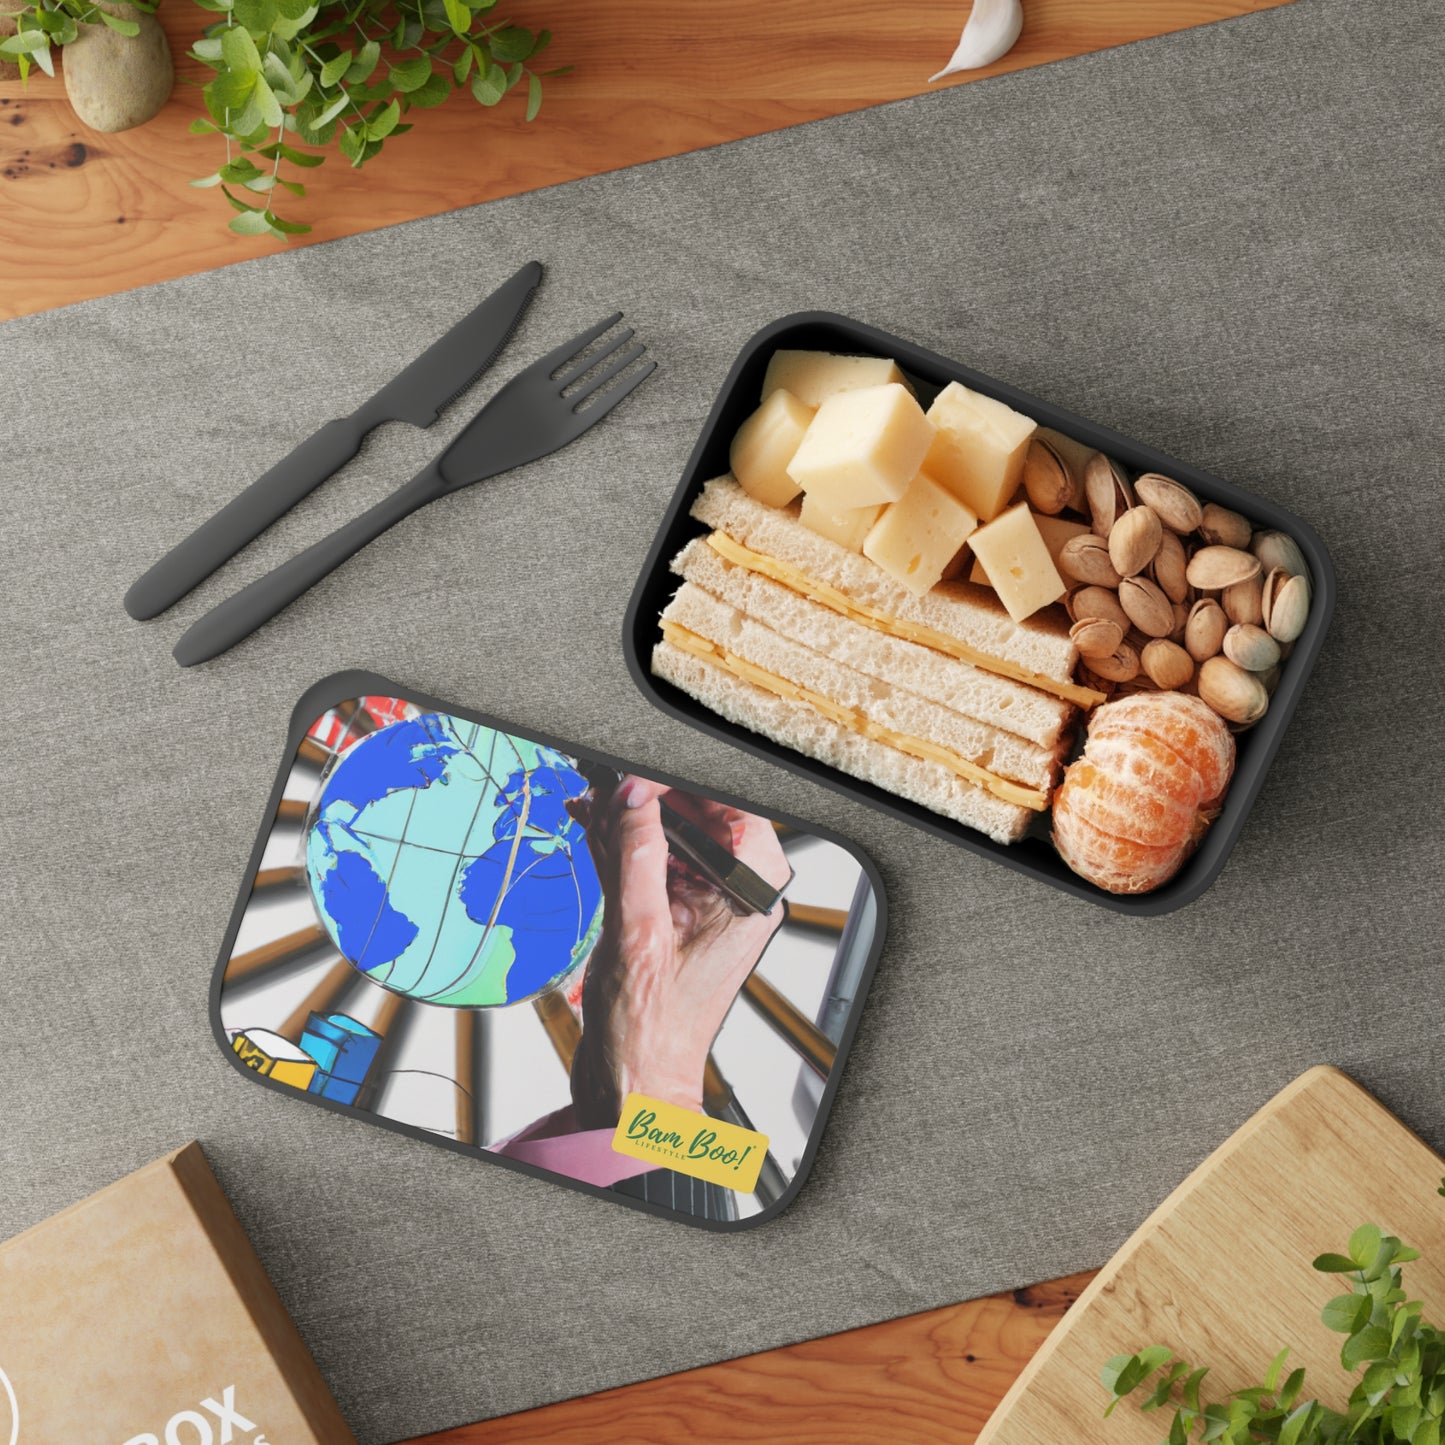 "Envisioning Our Future Through Nature, Technology, and the Human Experience" - Bam Boo! Lifestyle Eco-friendly PLA Bento Box with Band and Utensils